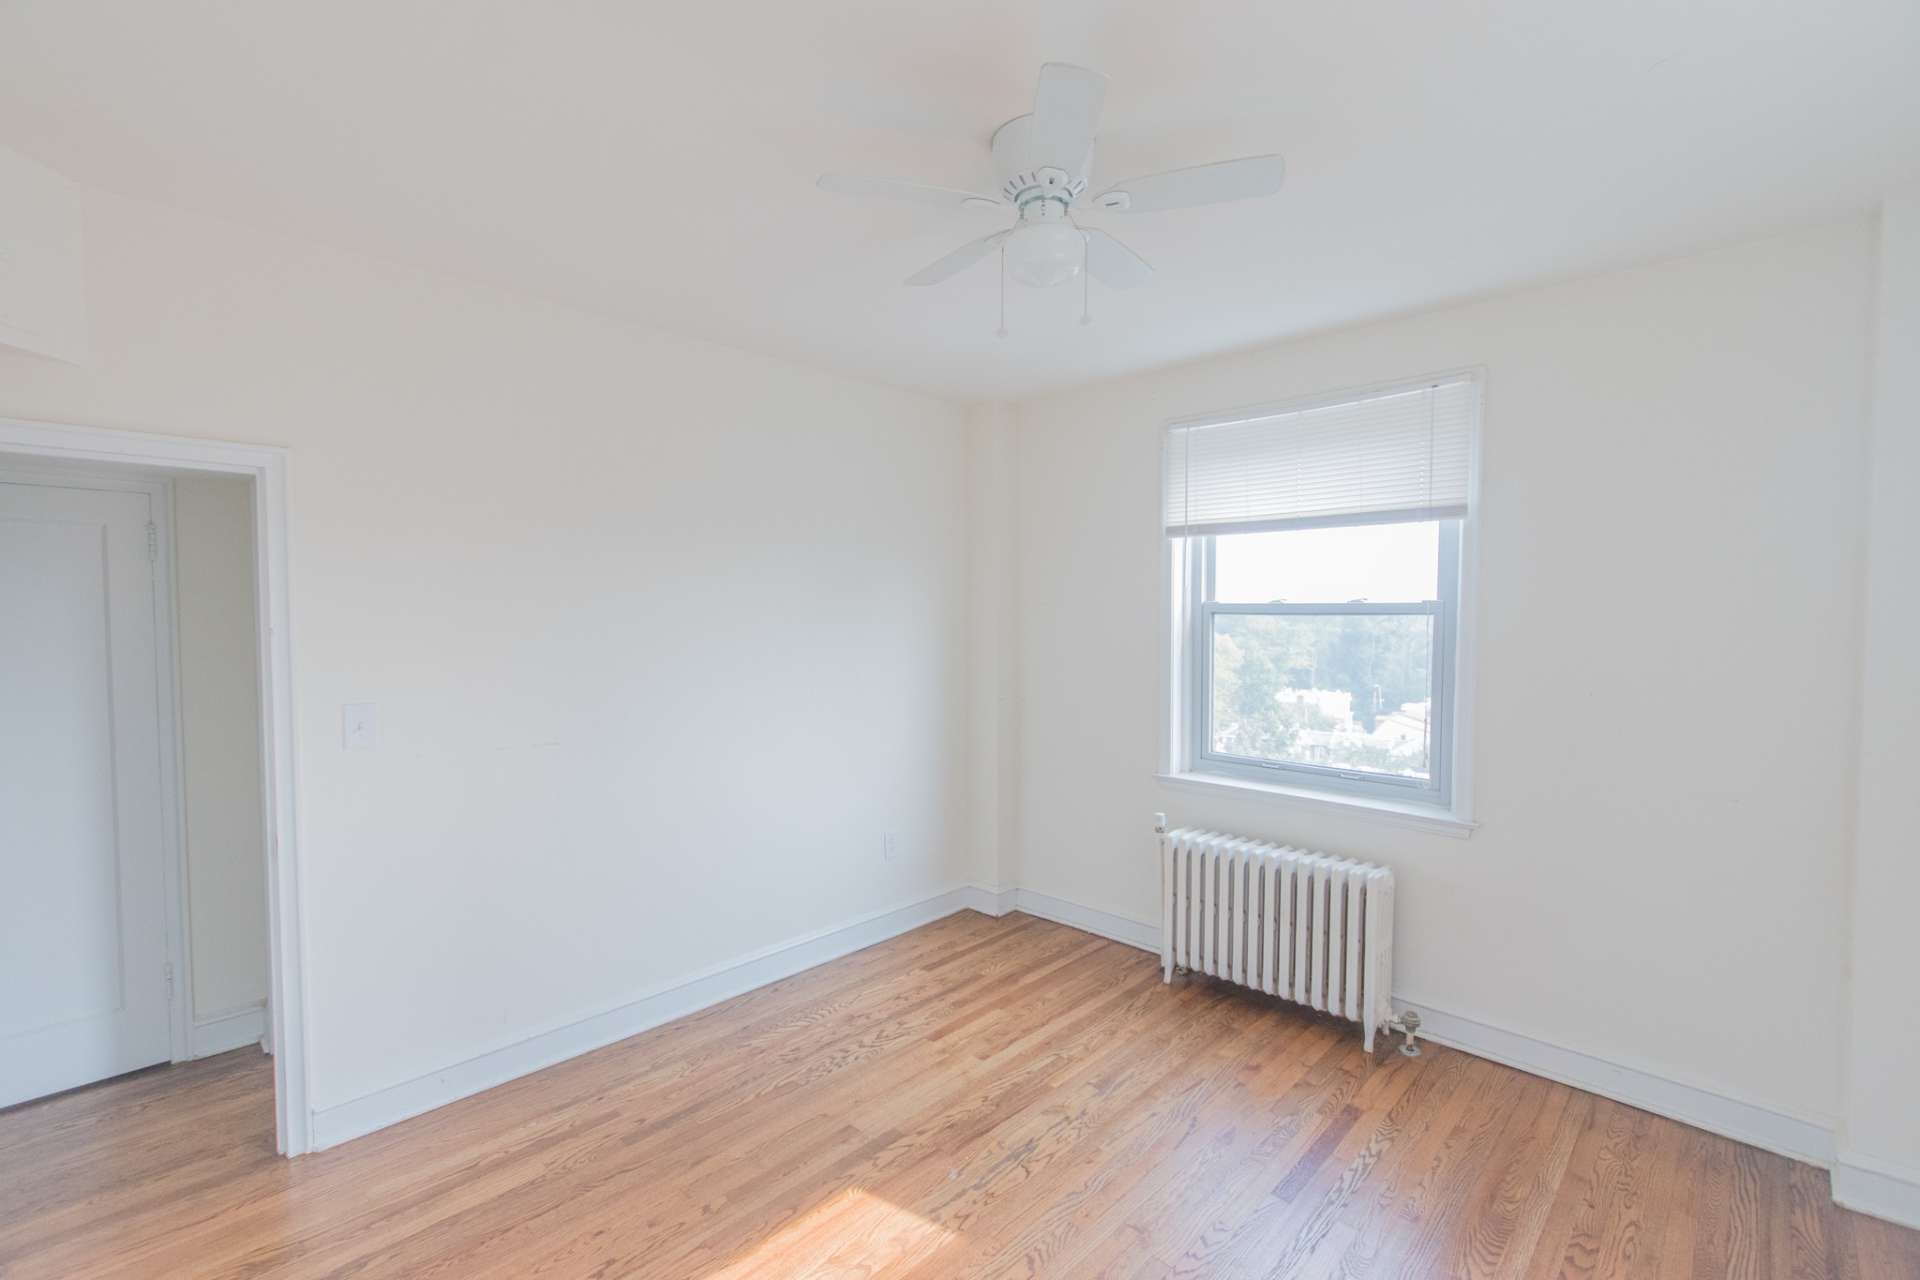 Living room area of an apartment unfurnished, fitted with vinyl flooring, a ceiling fan, and a radiator